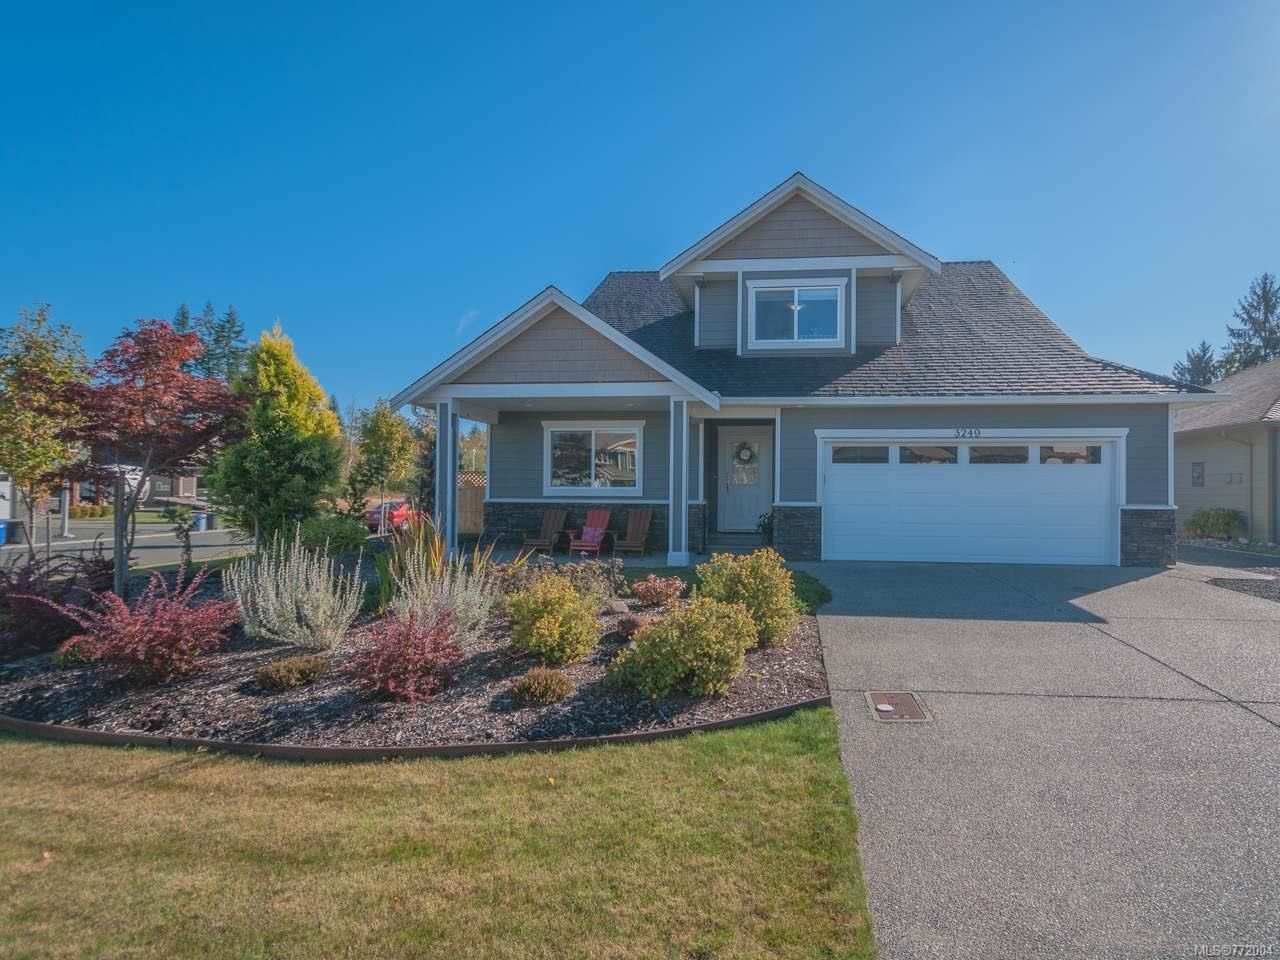 Main Photo: 3249 SHOAL PLACE in CAMPBELL RIVER: CR Willow Point House for sale (Campbell River)  : MLS®# 772004